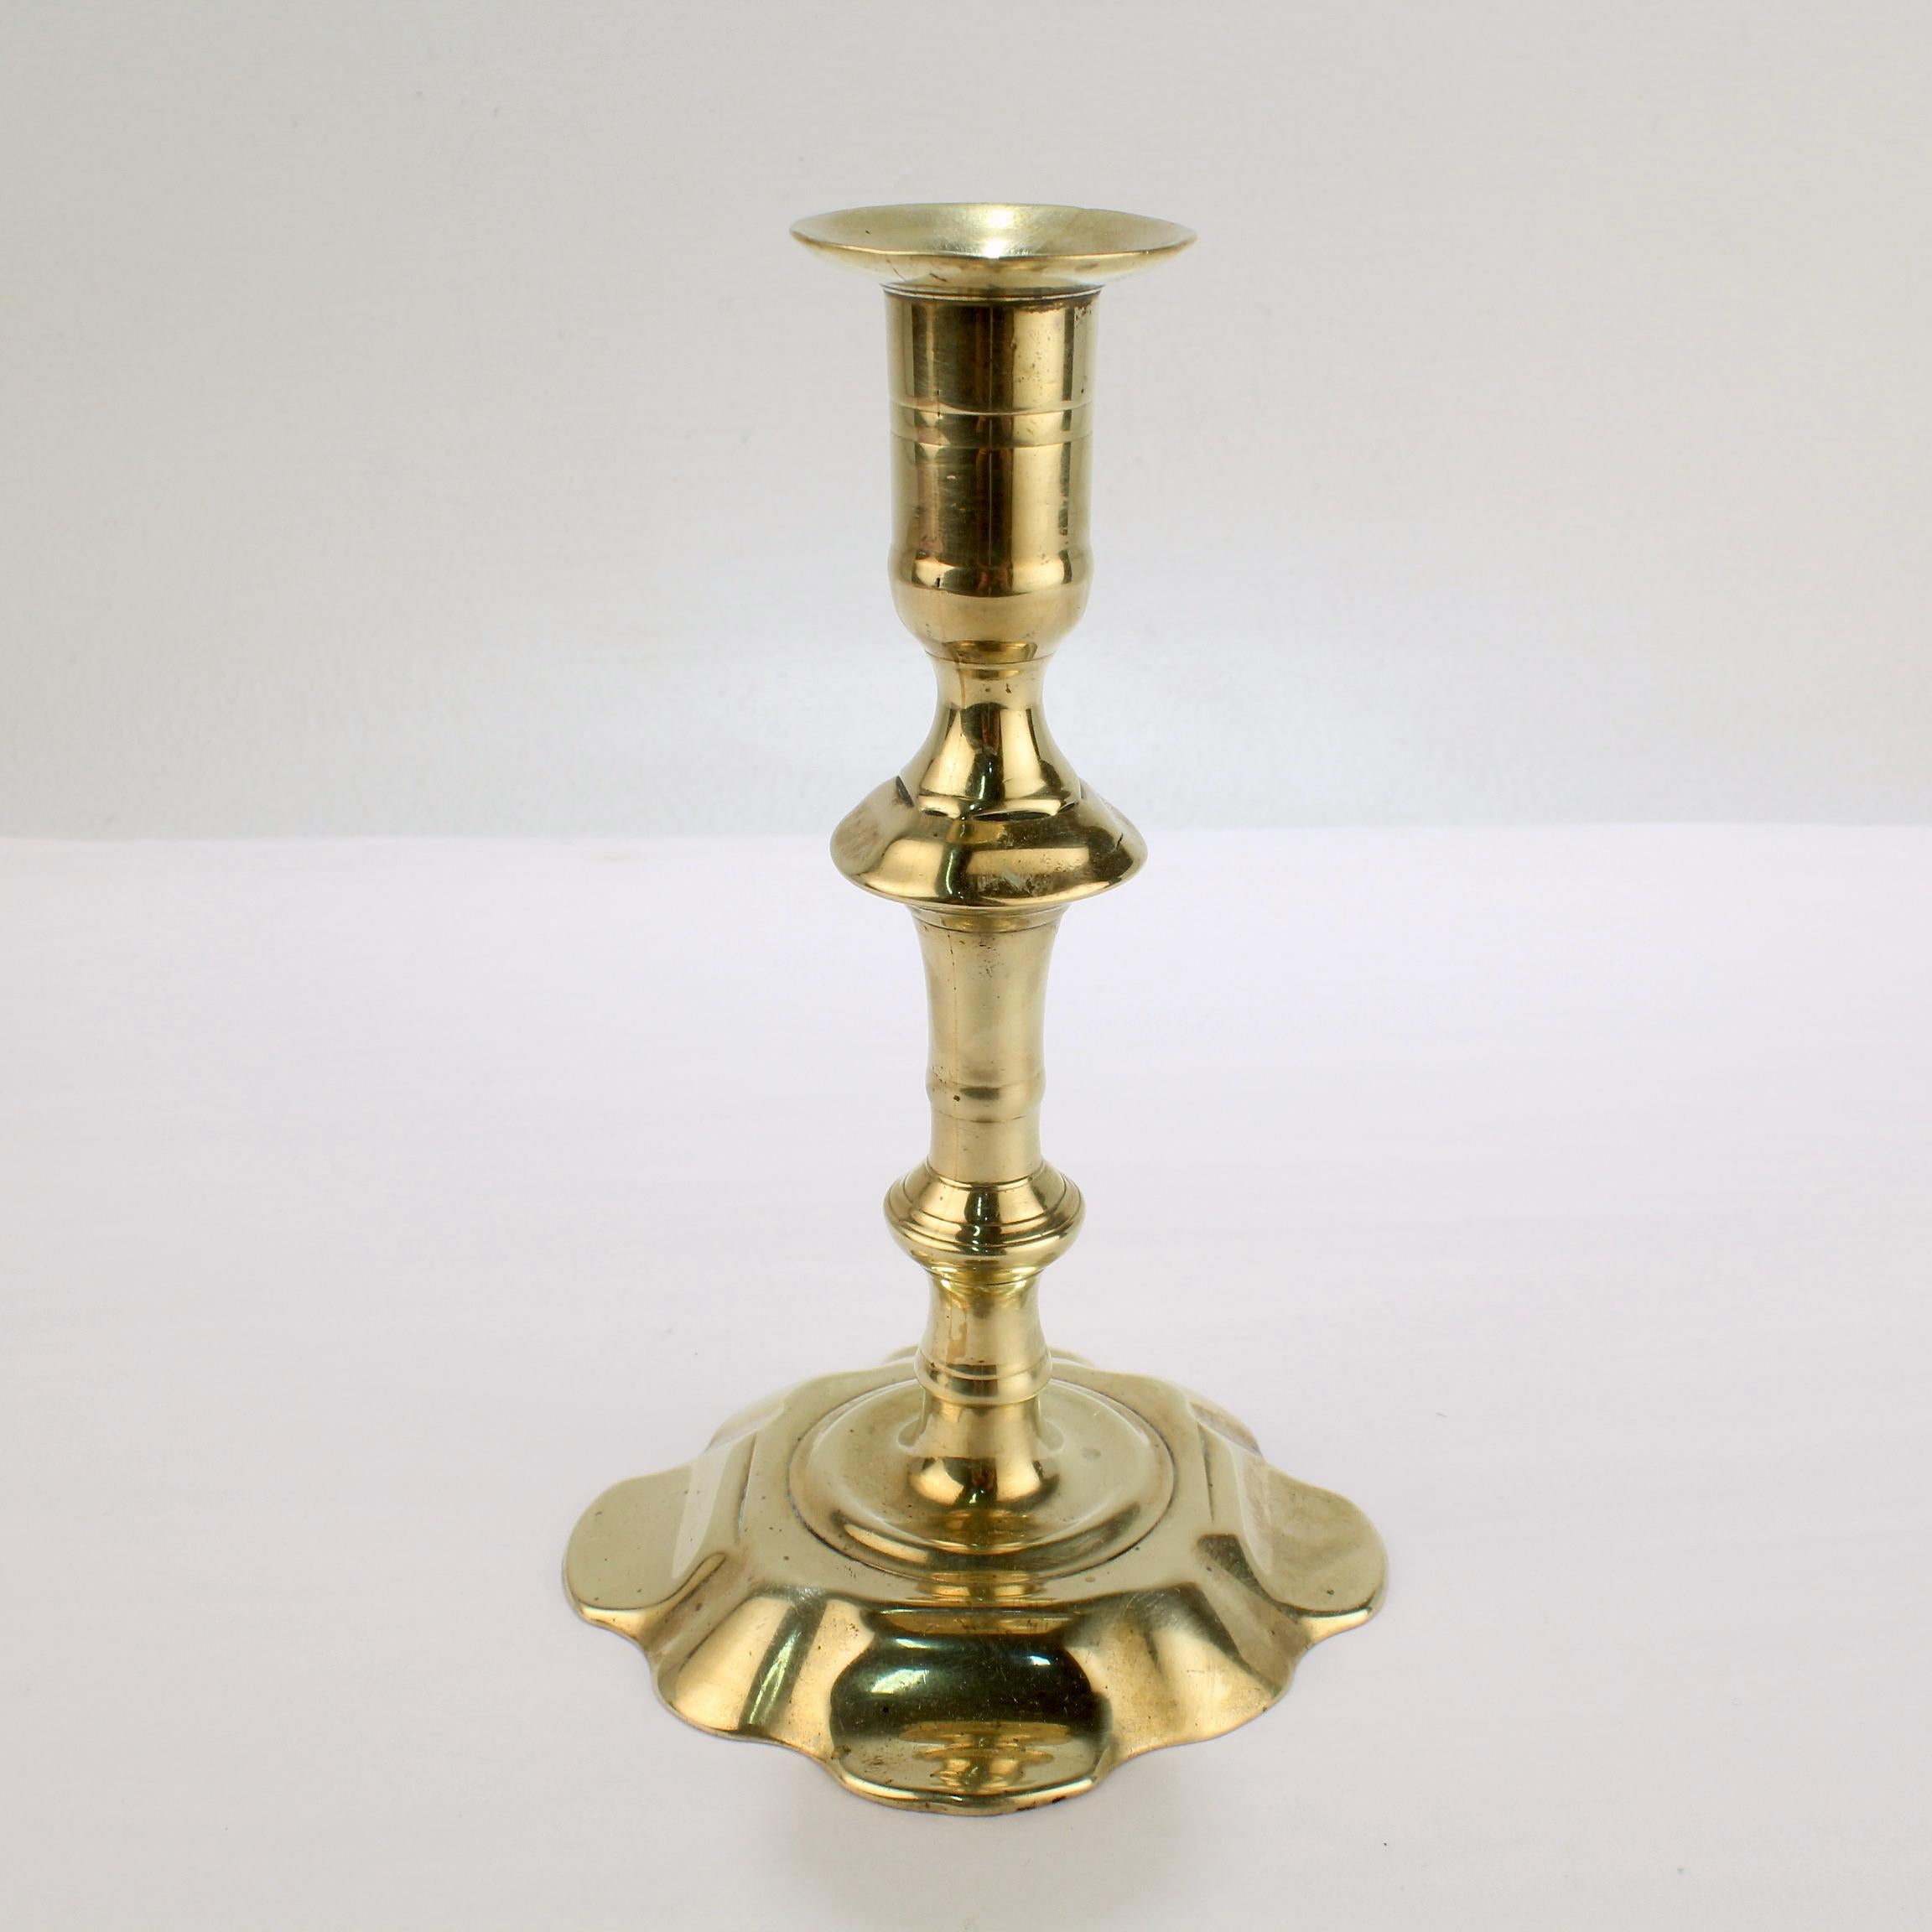 A fine antique English candlestick.

With a 8 lobed petal base, turned shaft, and integral bobeche. 

Simply a fine period candlestick!

Date:
Mid-18th century

Overall condition:
It is in overall good, as-pictured, used estate condition.